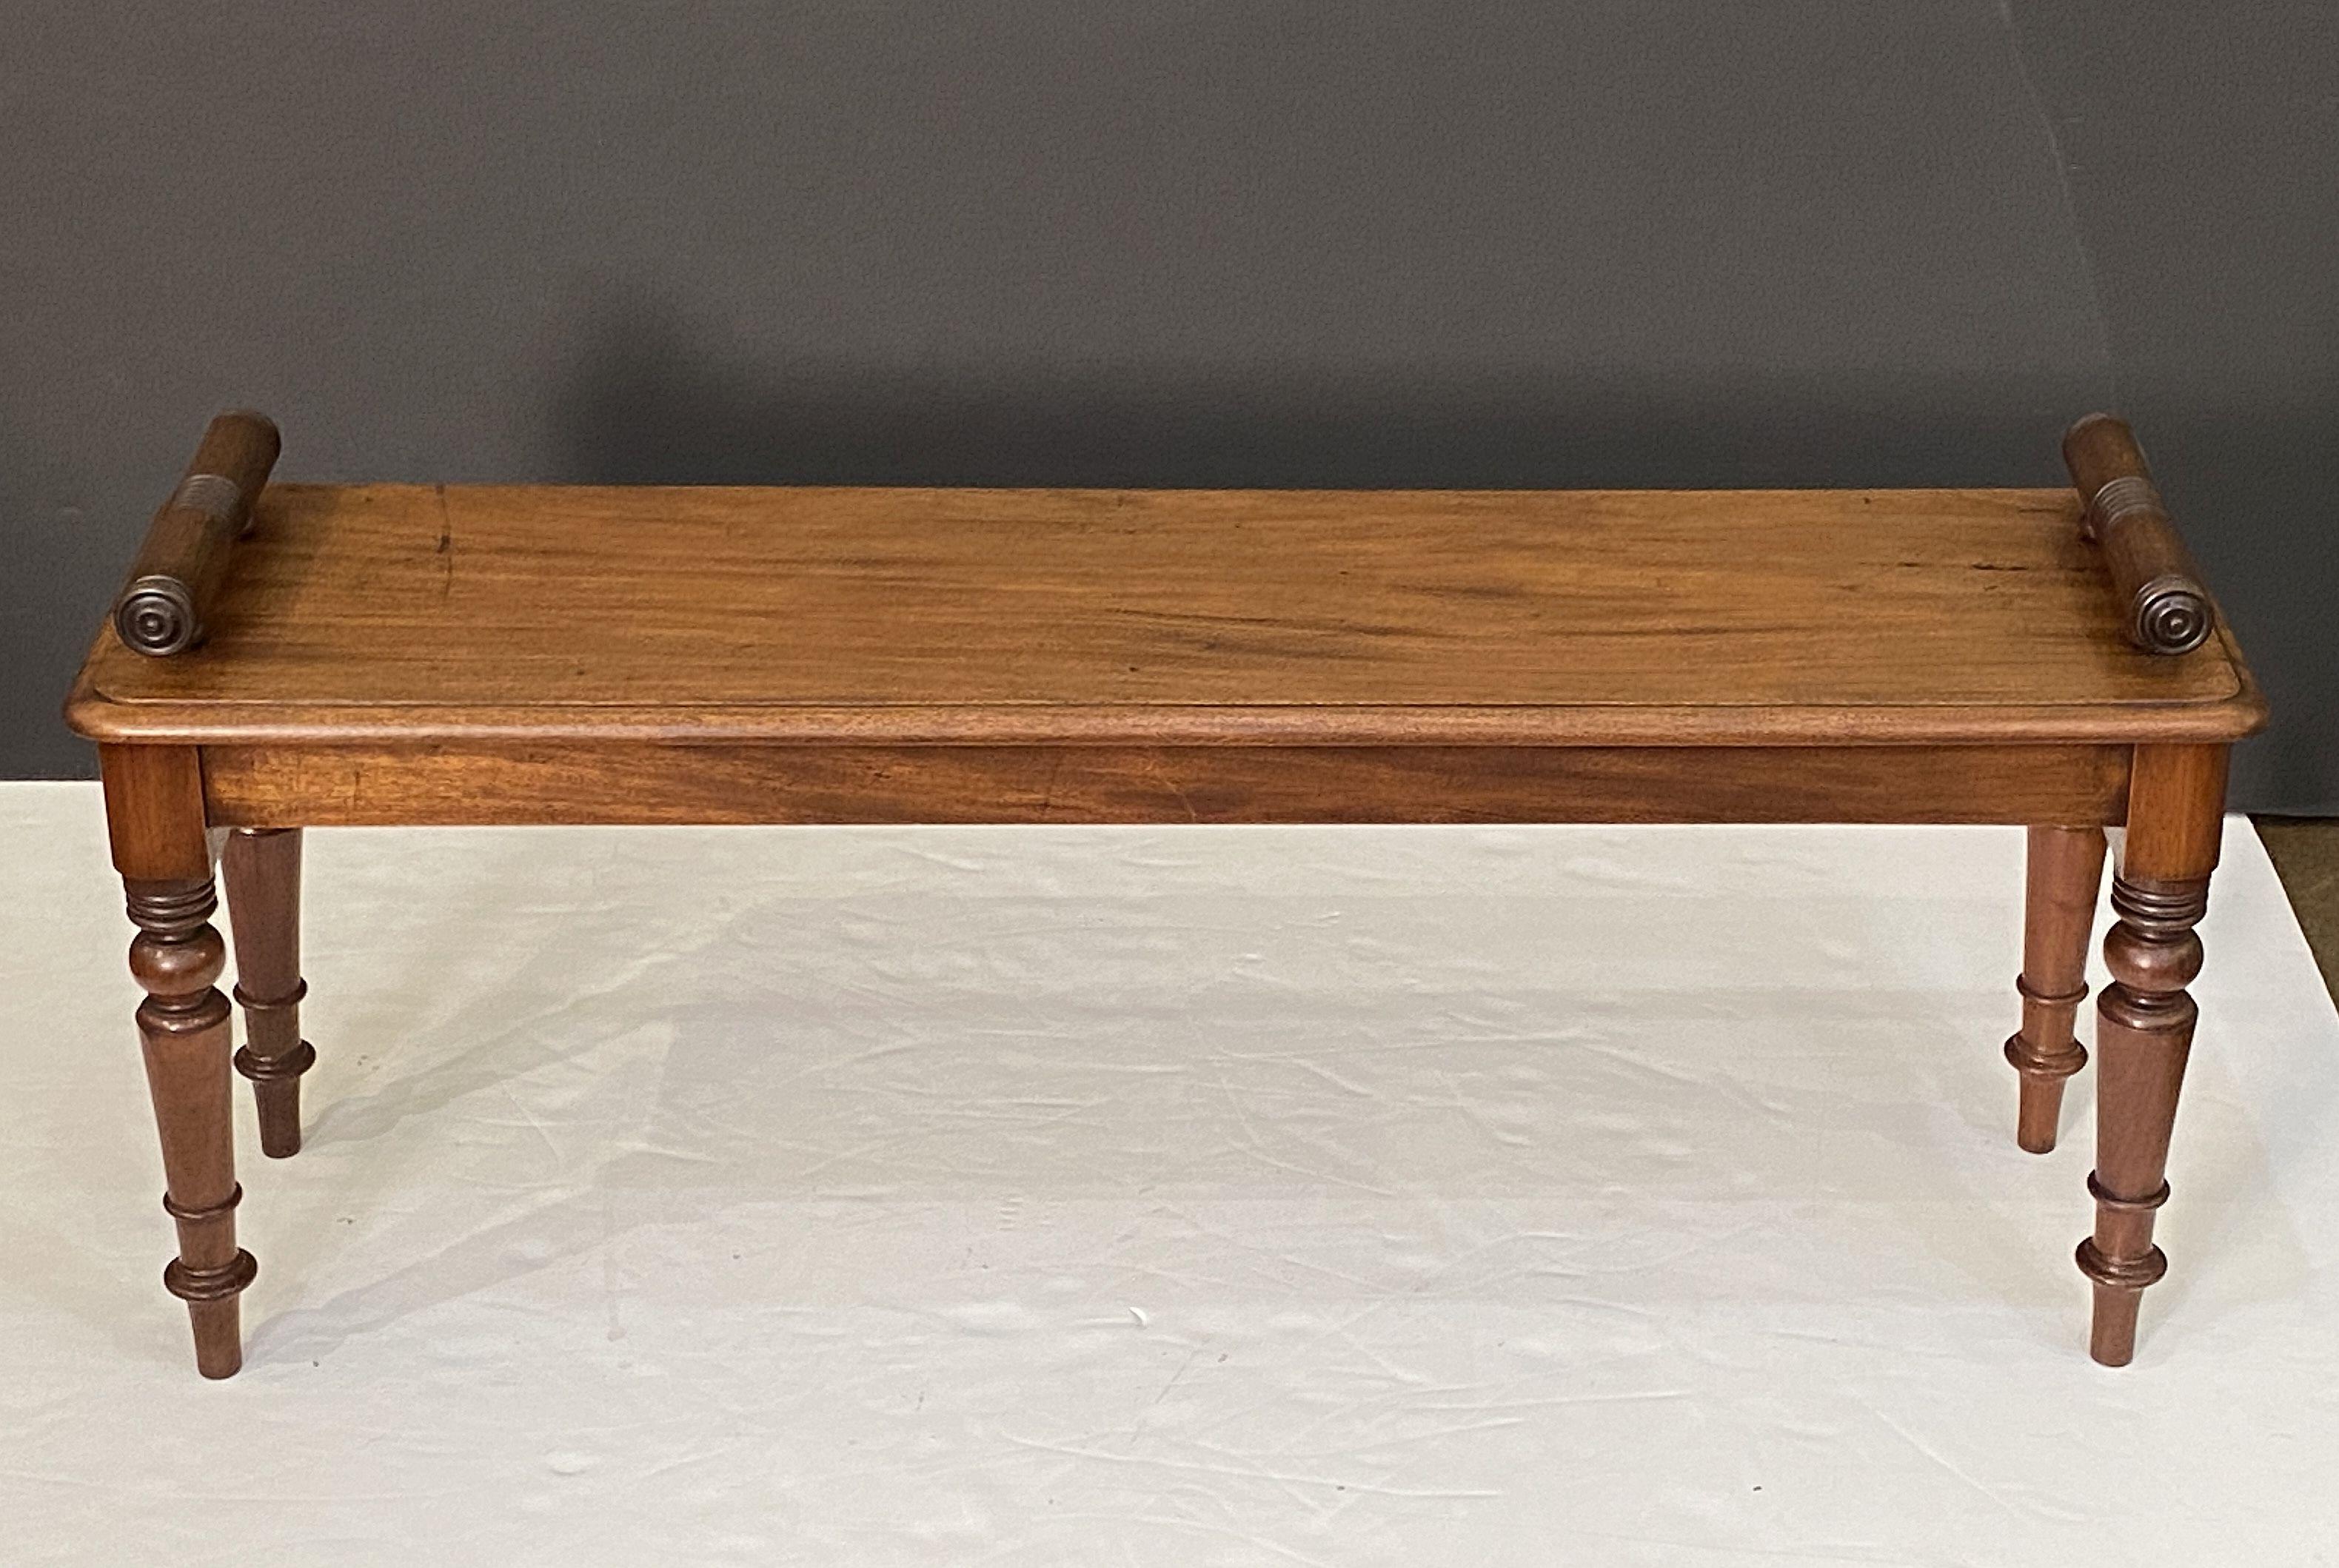 A fine English hall bench or window seat of mahogany from the Edwardian era, featuring turned handles at opposing ends over a long plank seat and set upon four turned legs.

Dimensions:

H 20 1/2 inches
W 47 3/4 inches
D 12 3/4 inches

Seat